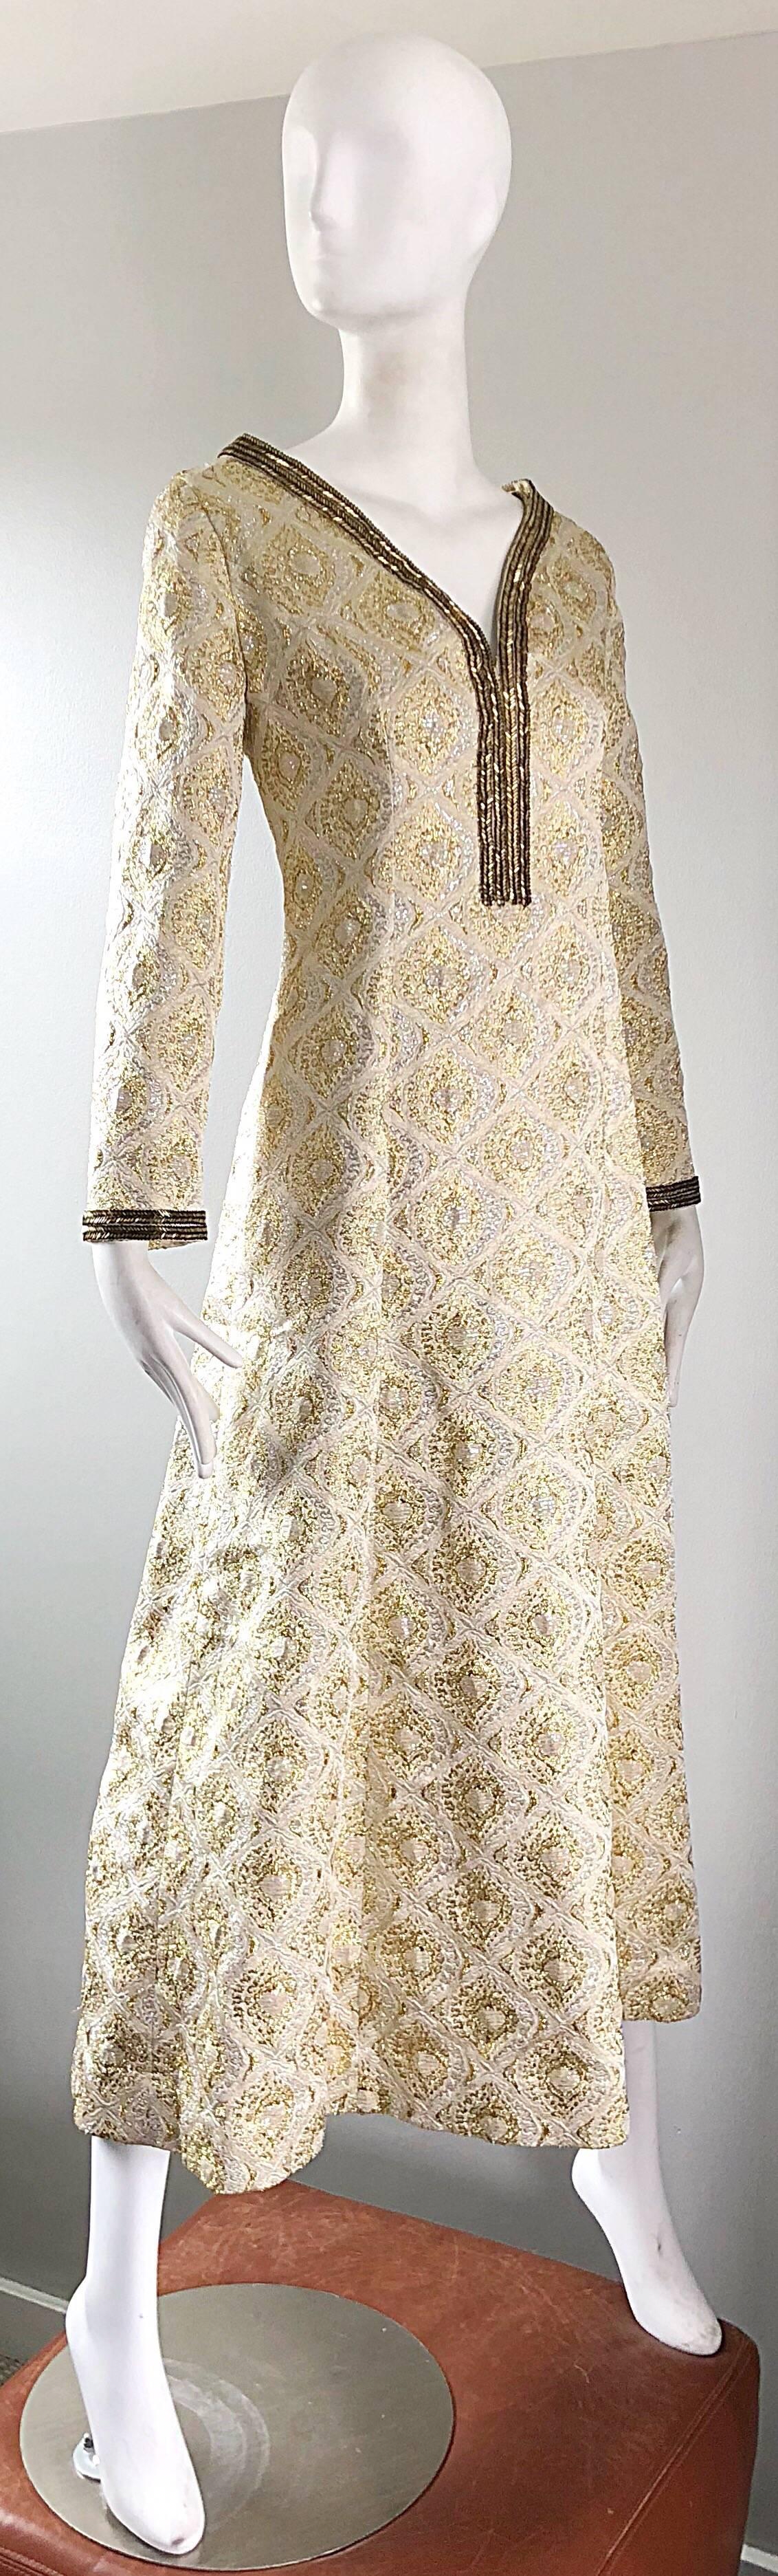 Beige Amazing 1970s Gold + Silver Silk Brocade Beaded Vintage 70s Caftan Maxi Dress For Sale